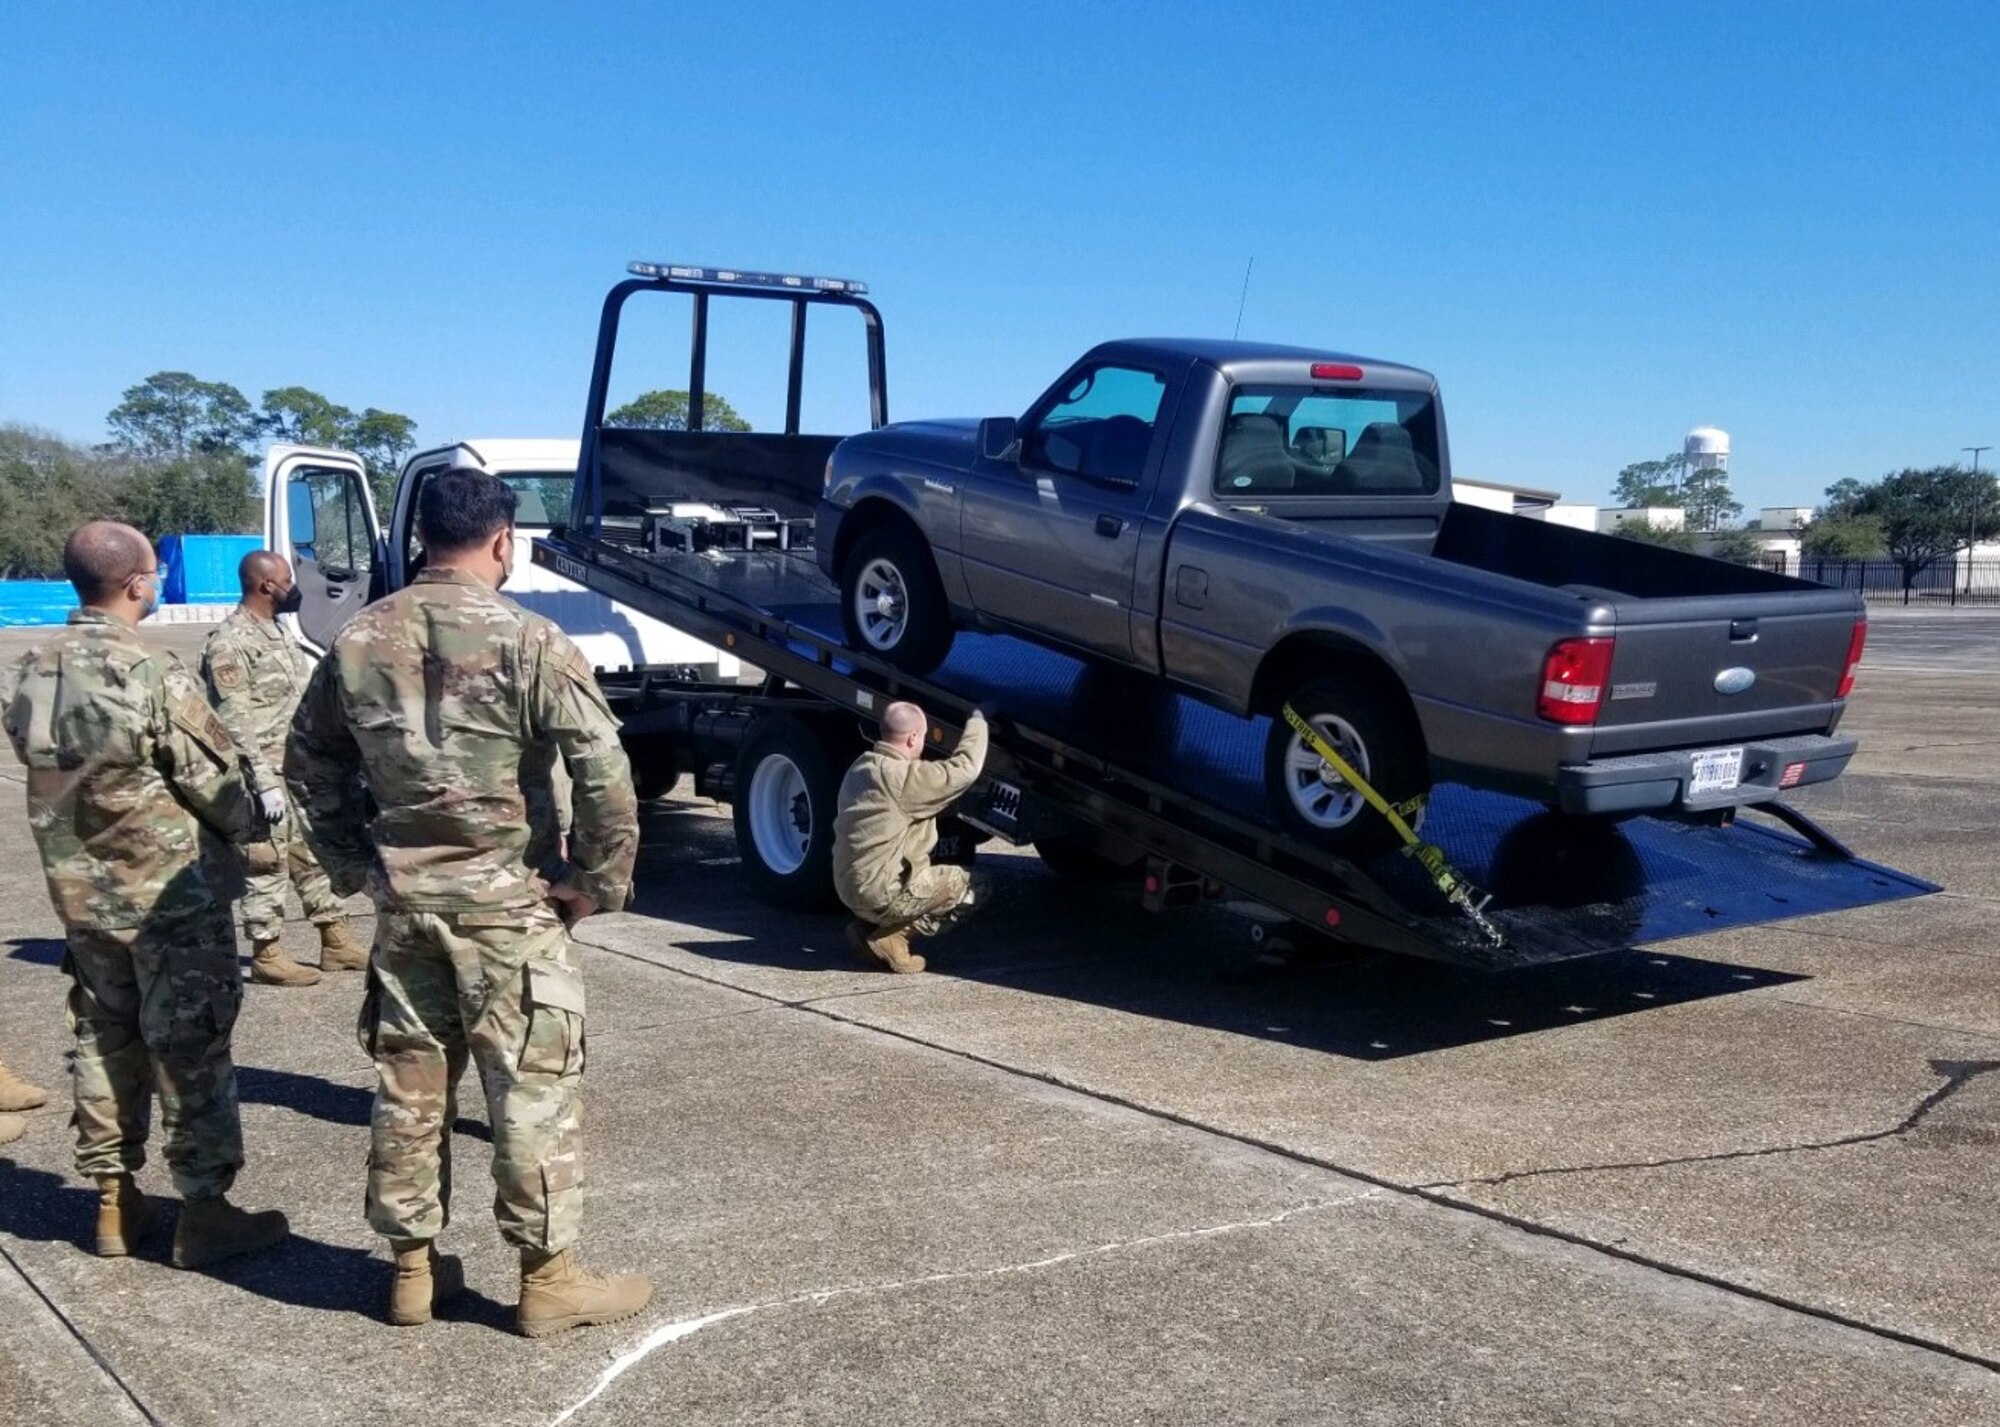 Three Airmen stand to the side and watch one fasten a pickup truck to tow